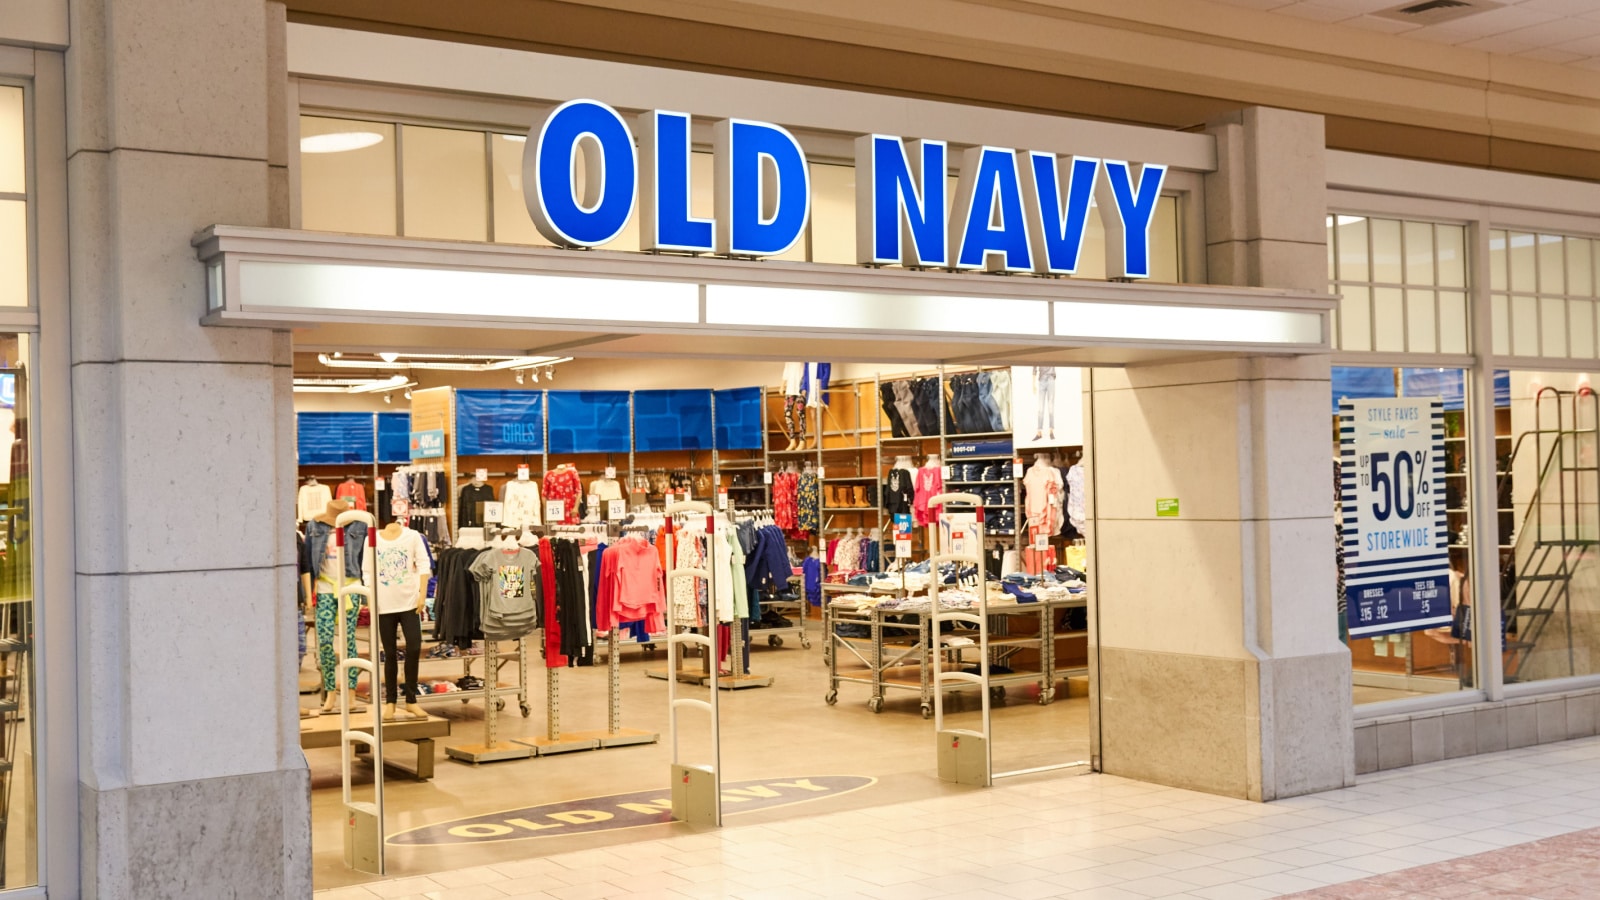 PLATTSBURGH, USA - MARCH 5, 2017 : Old Navy boutique in Plattsbourgh NY shopping center. Old Navy is an American clothing and accessories retailing company owned by GAP.